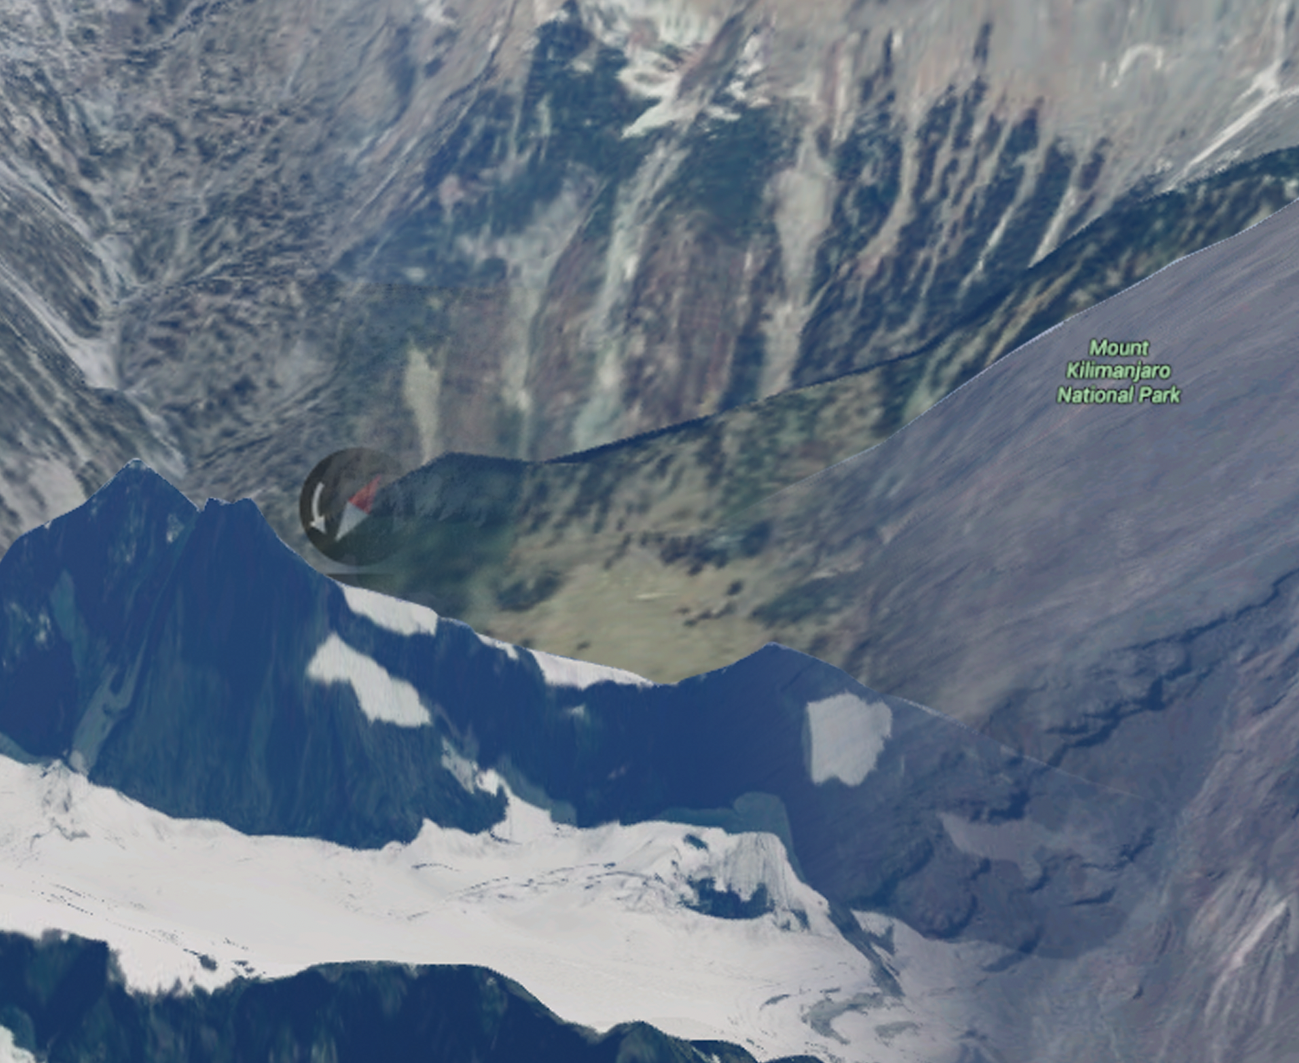 Close up detail of the collage showing a label for Mount Kilamanjaro National Park and a bit of the Google Earth compass